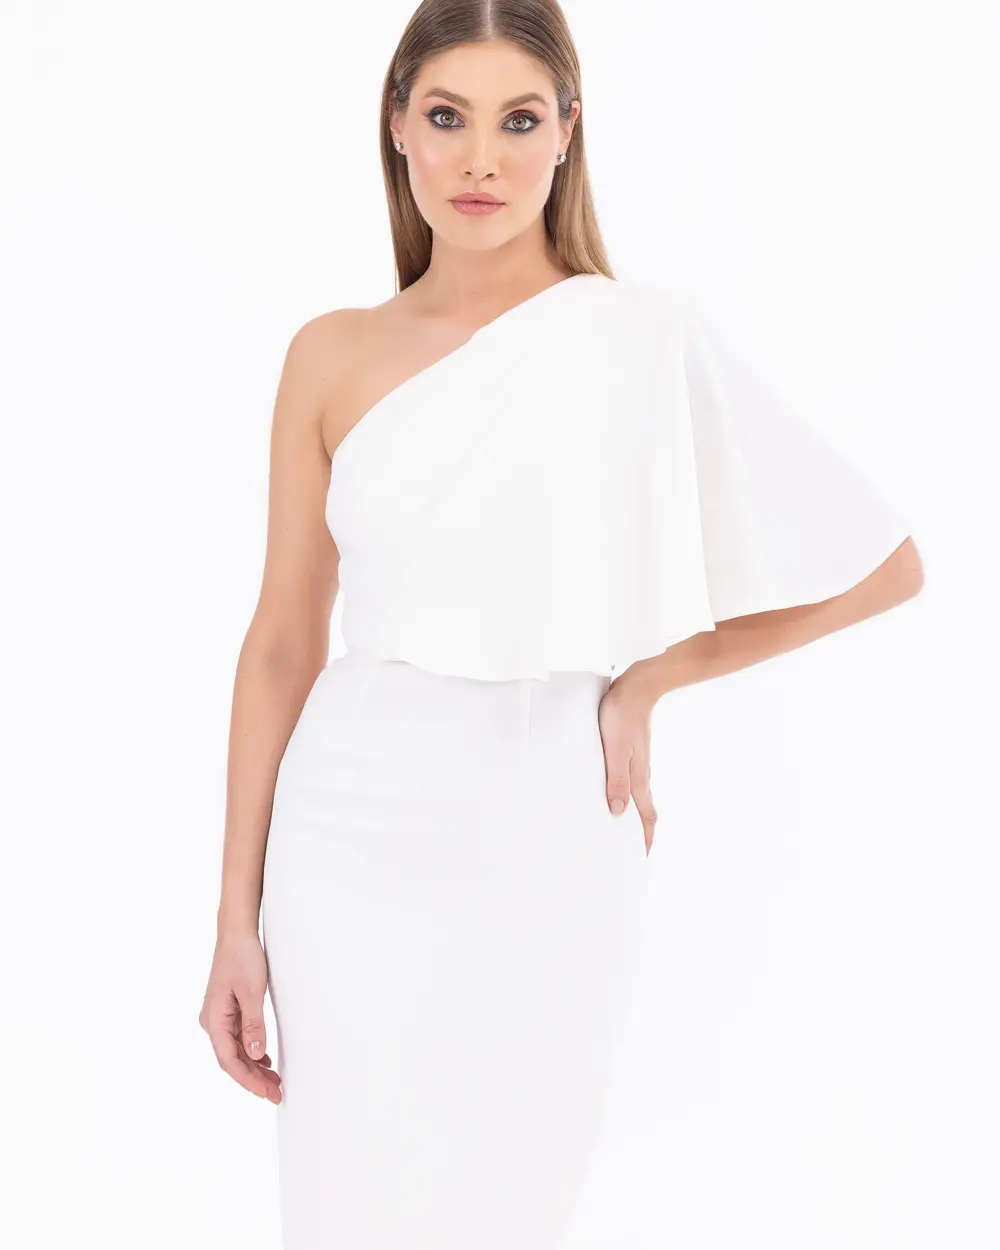 Nass boutique is a multi-brand boutique curating women's clothing and  accessoriesOFF SHOULDER SLIM CUT CREPE LONG DRESS